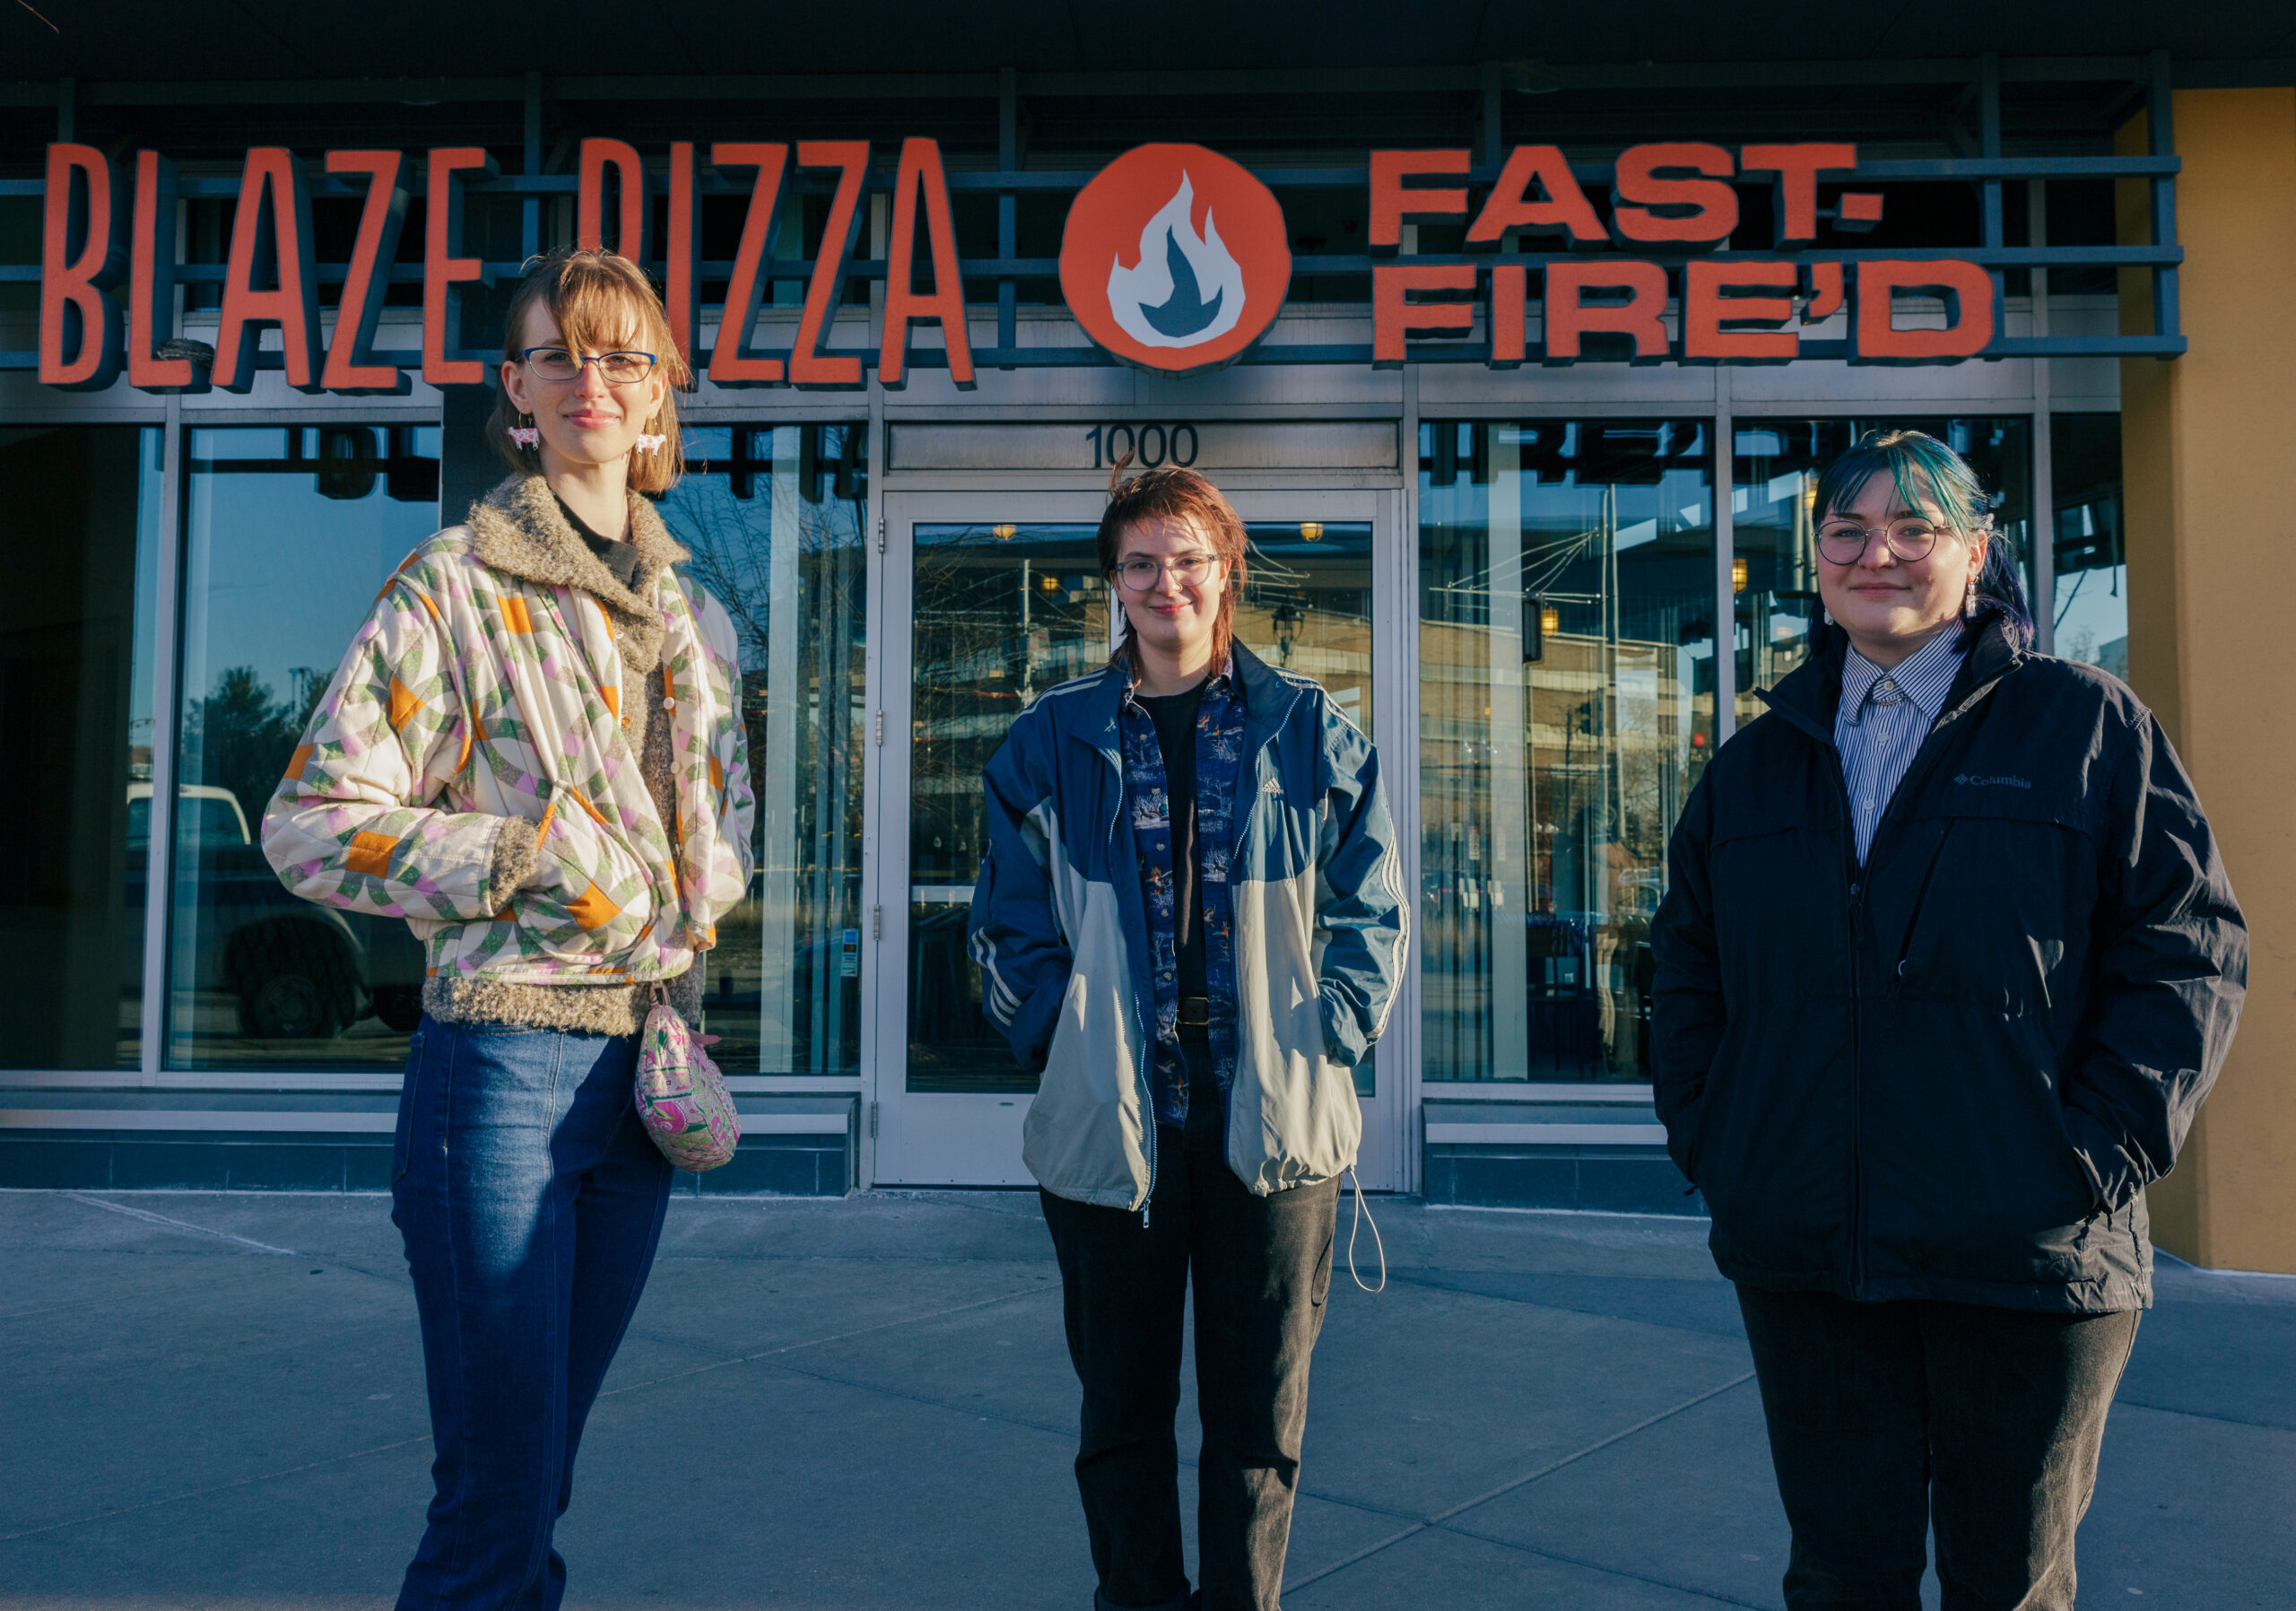 three people stand in front of the blaze pizza storefront, one wears a khaki jacket, one a denim jacket, and one a black jacket with blue hair